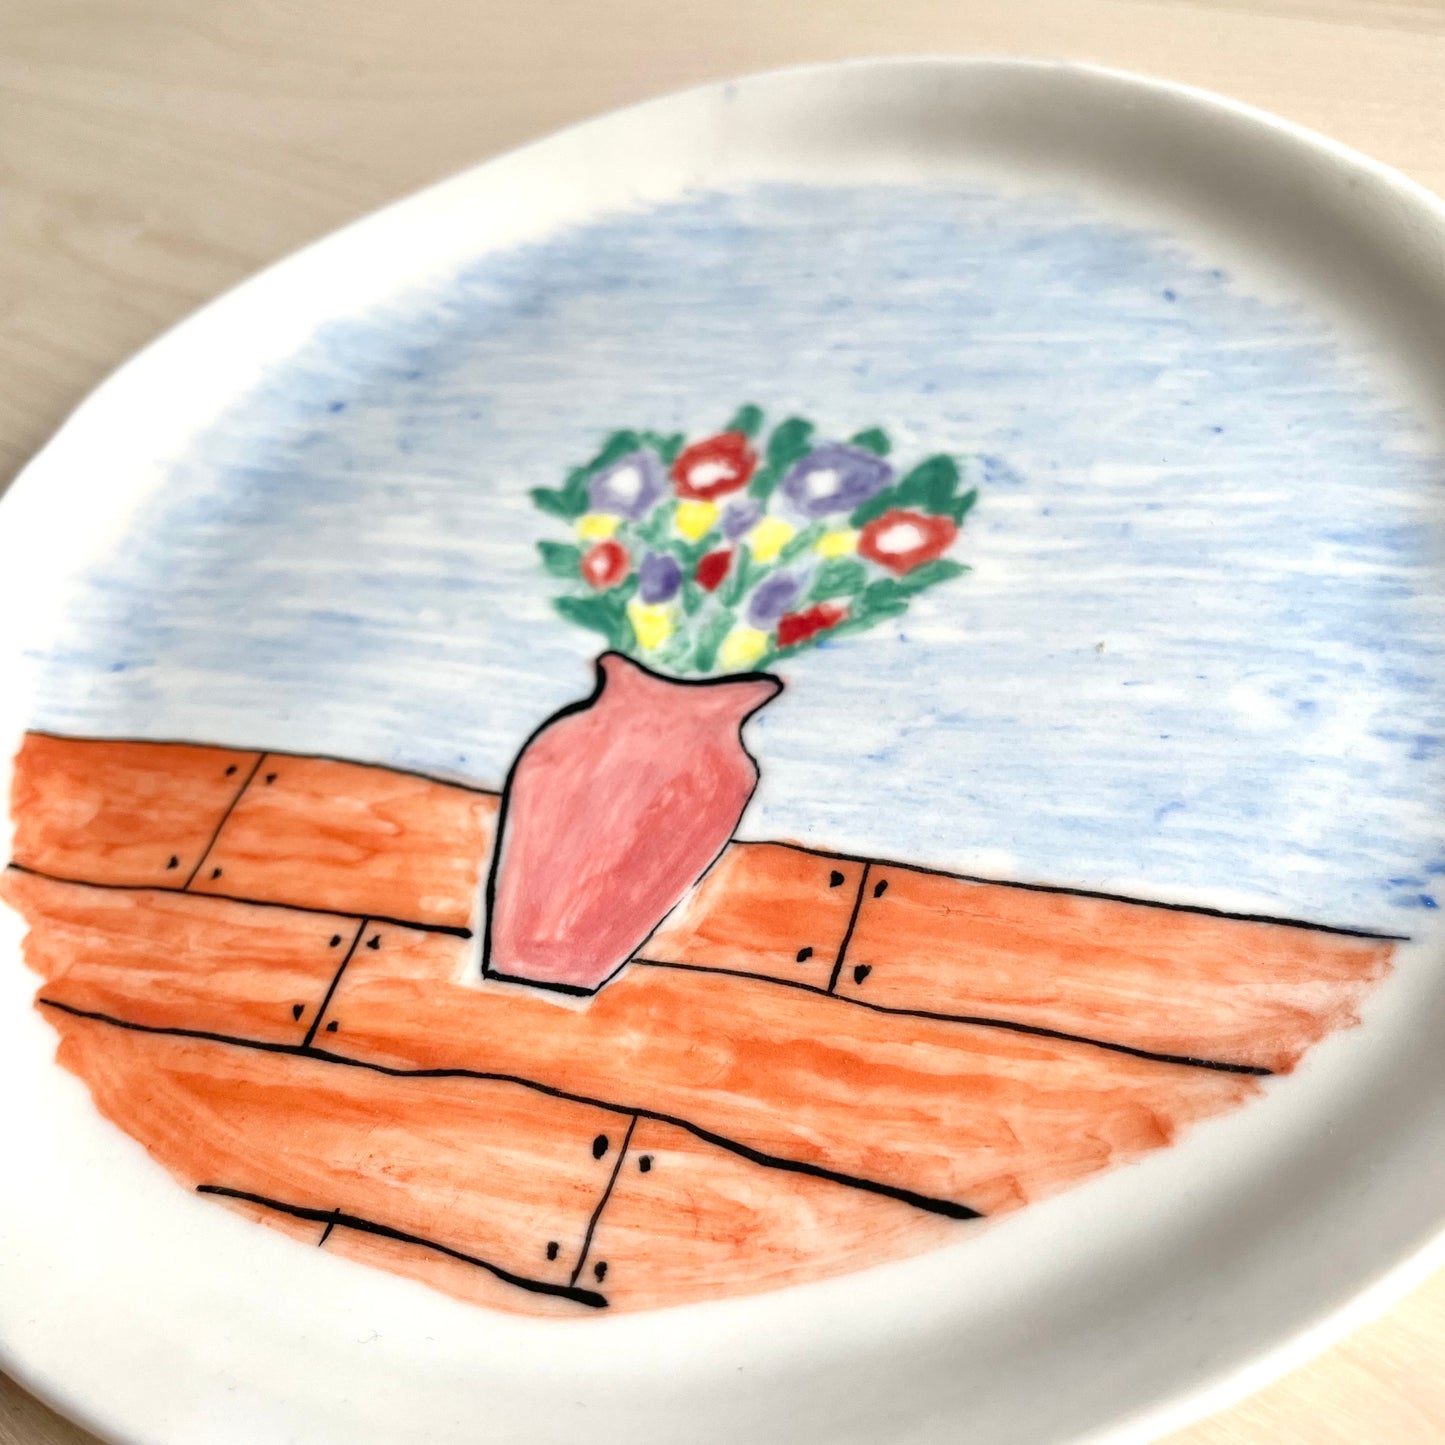 Red vase Plate